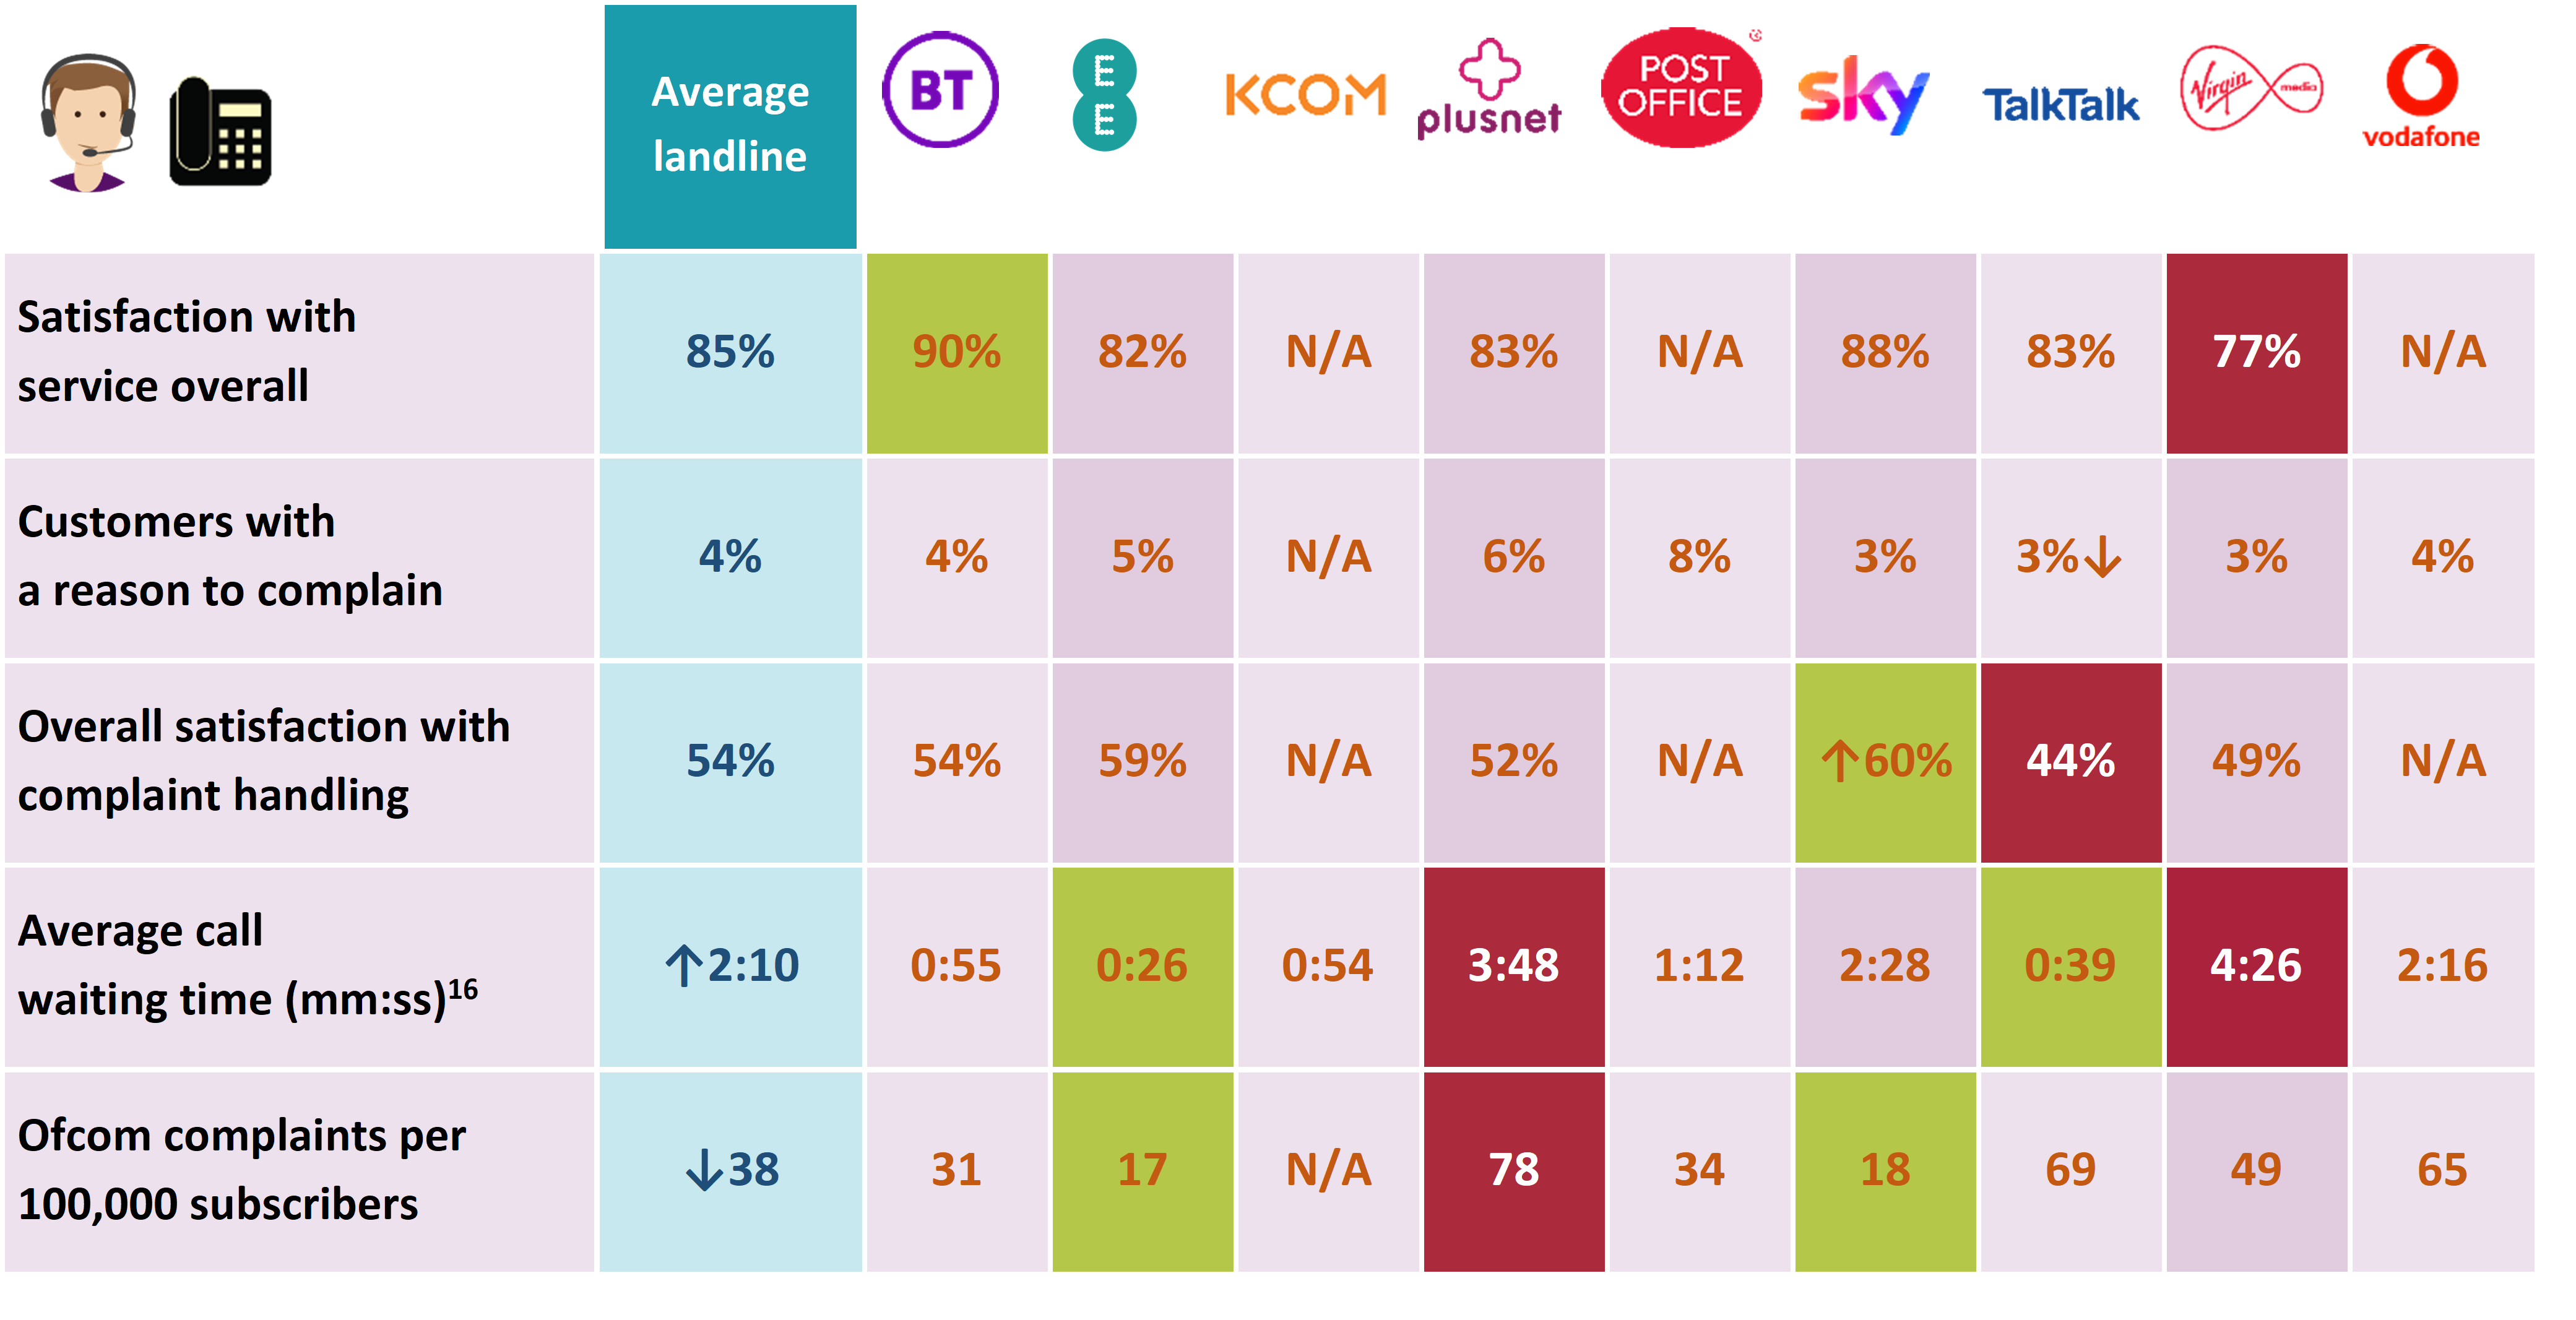 This table summarises the performance of each provider on five metrics: satisfaction with overall service, customers with a reason to complain, overall satisfaction with complaint handling, average call waiting time and complaints per 100,000 subscribers. A fully accessible version of the table is included in the Executive Summary of the report.